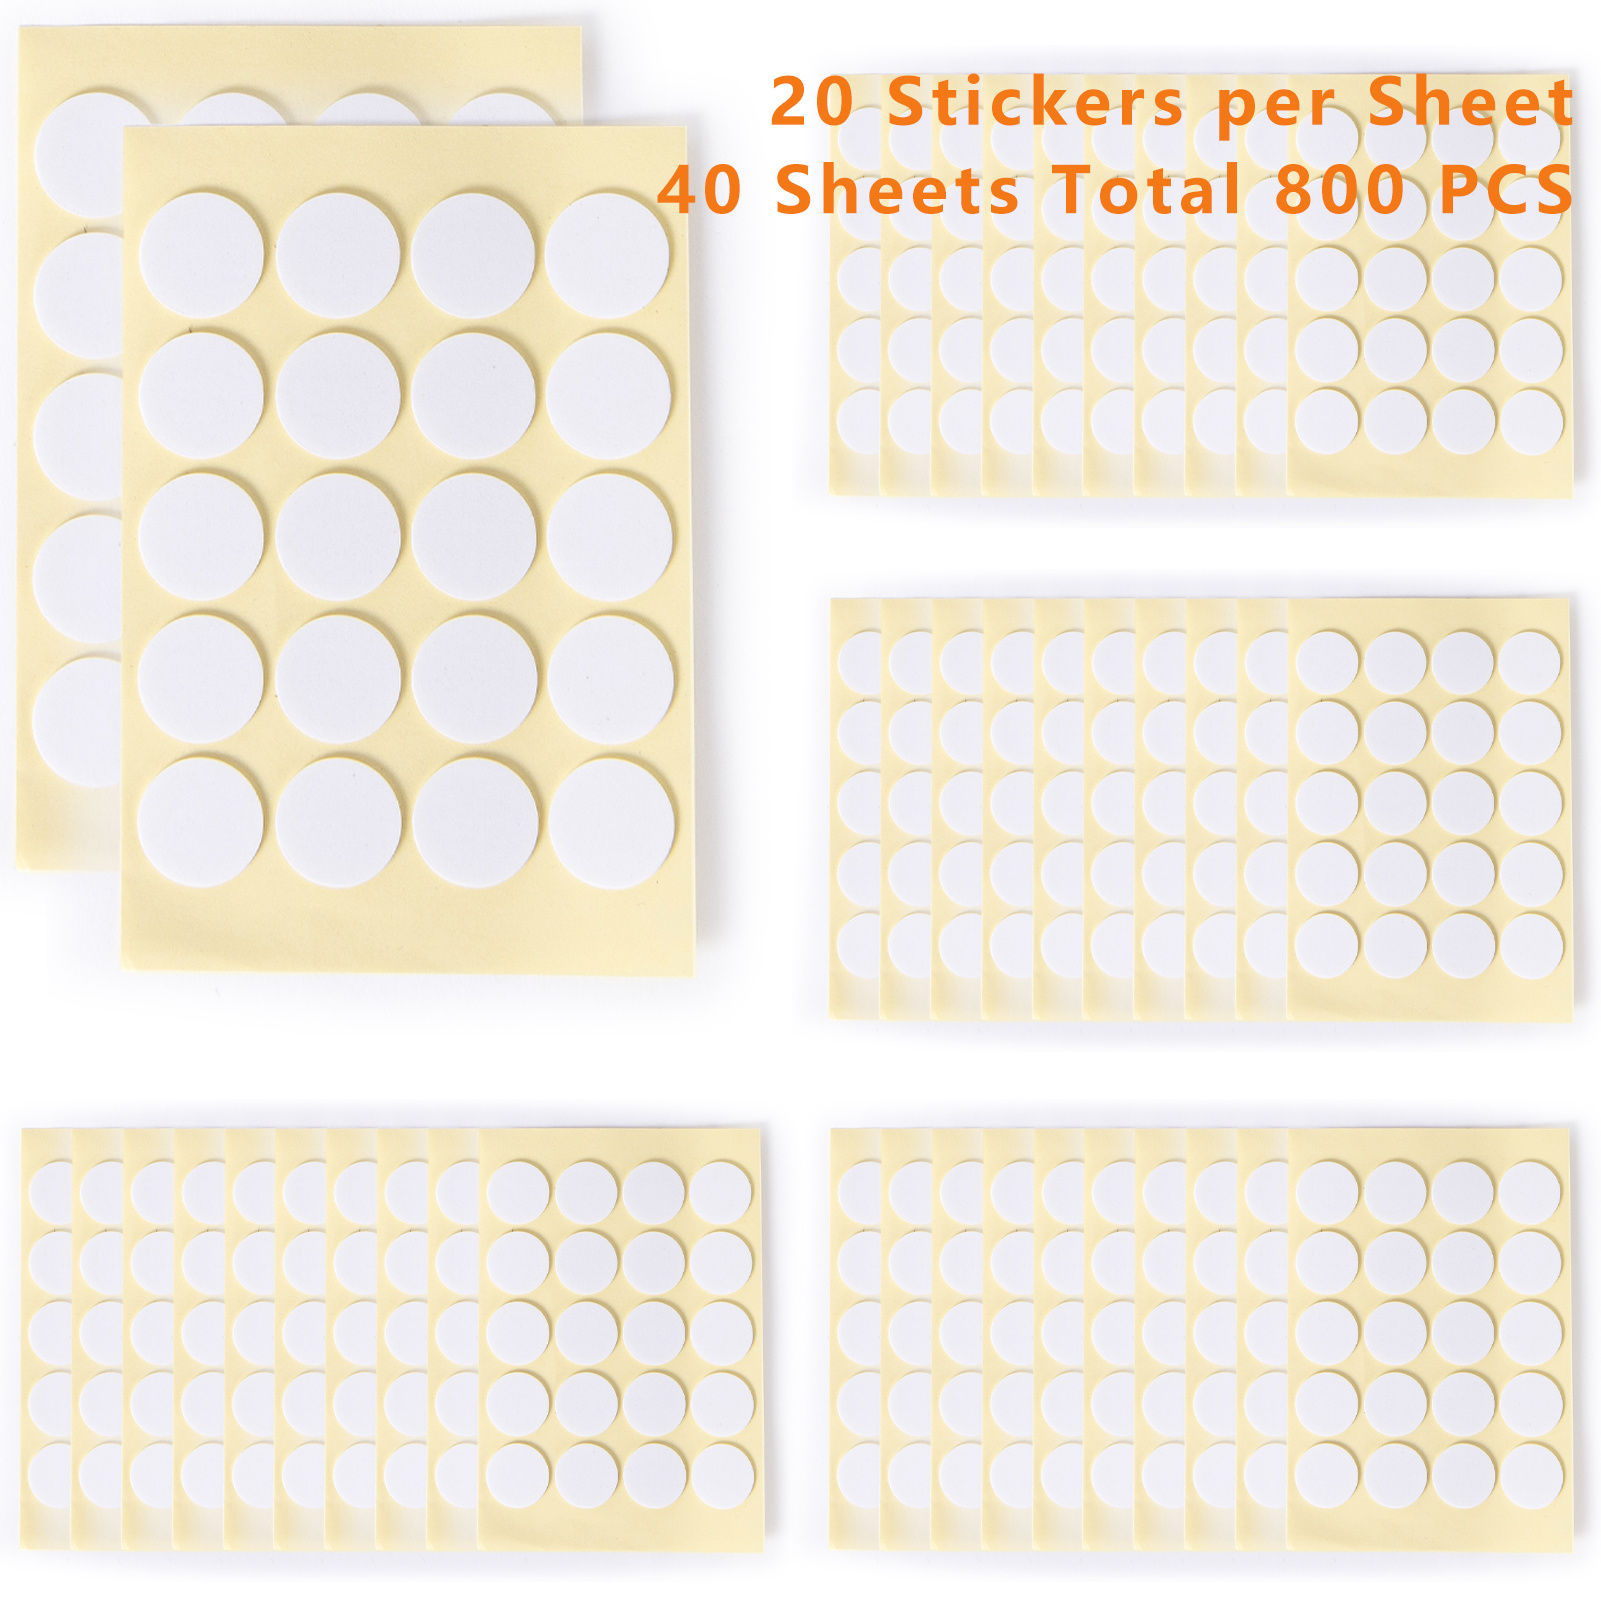 EricX Light 120 pcs Candle Wick Stickers,Made of Heat Resistance Glue  Adhere Steady in Hot Wax For Candle Making